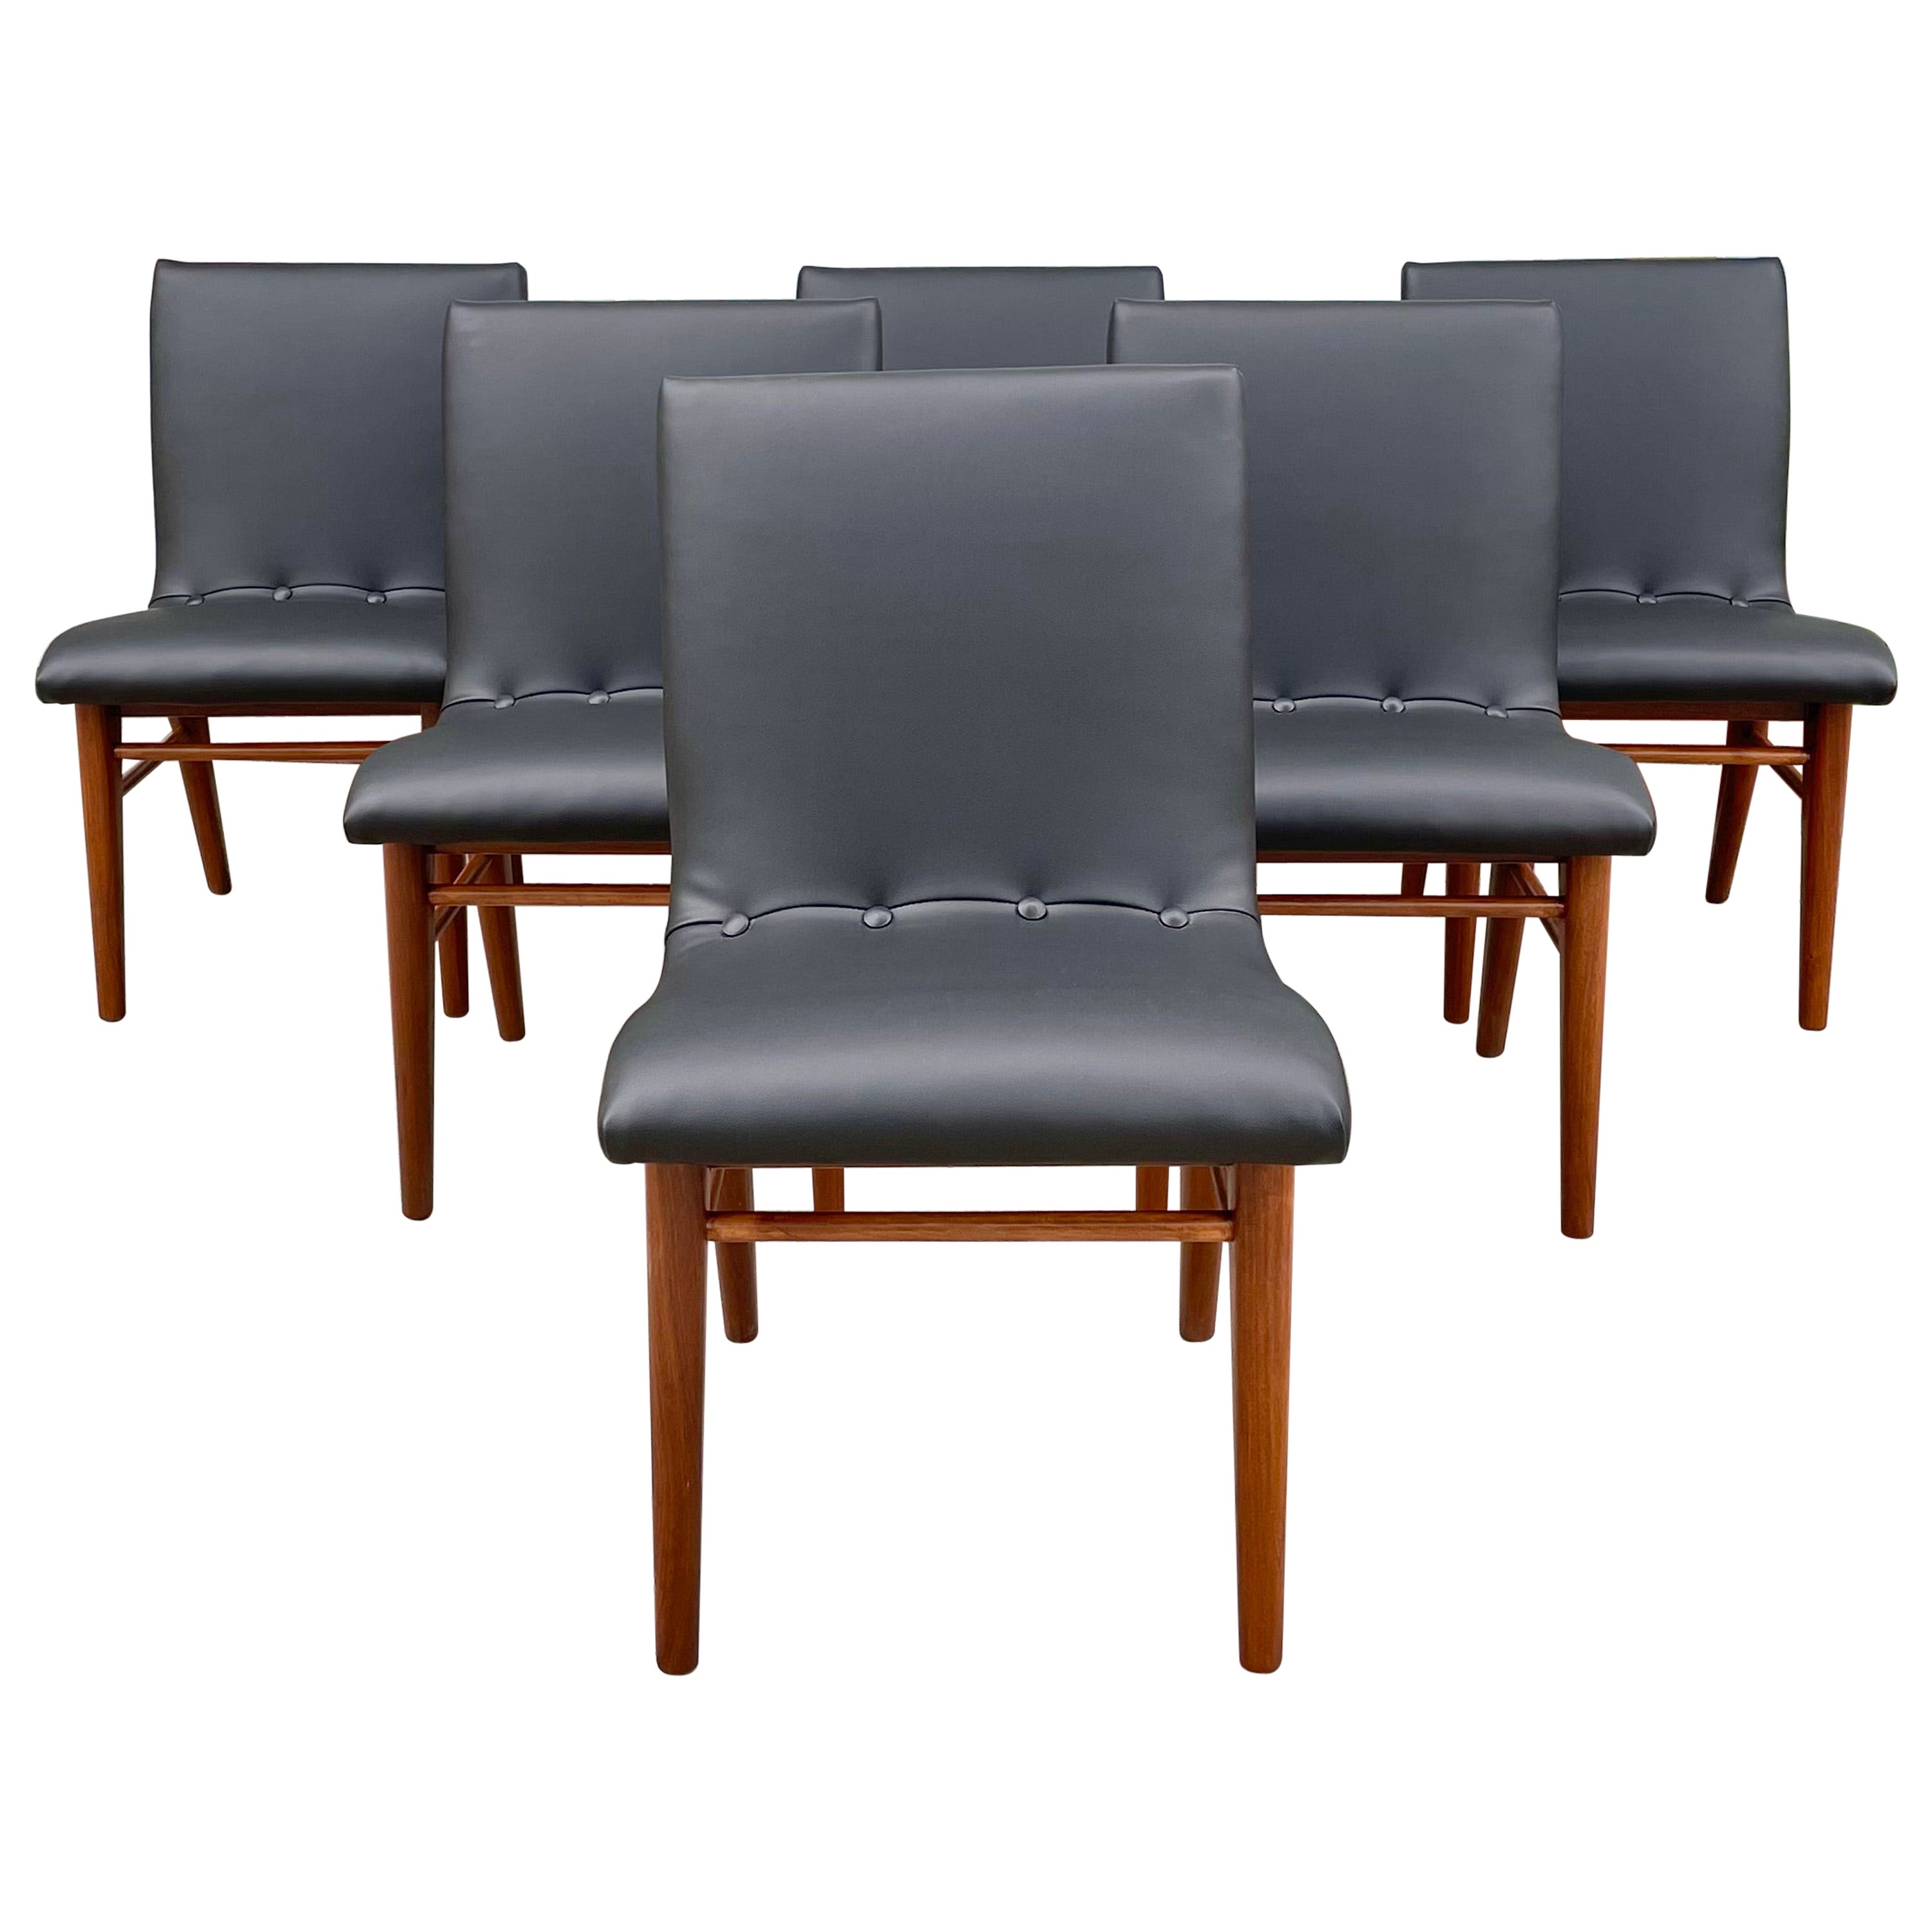 Midcentury Walnut & Leatherette Dining Chairs, Set of 6 For Sale